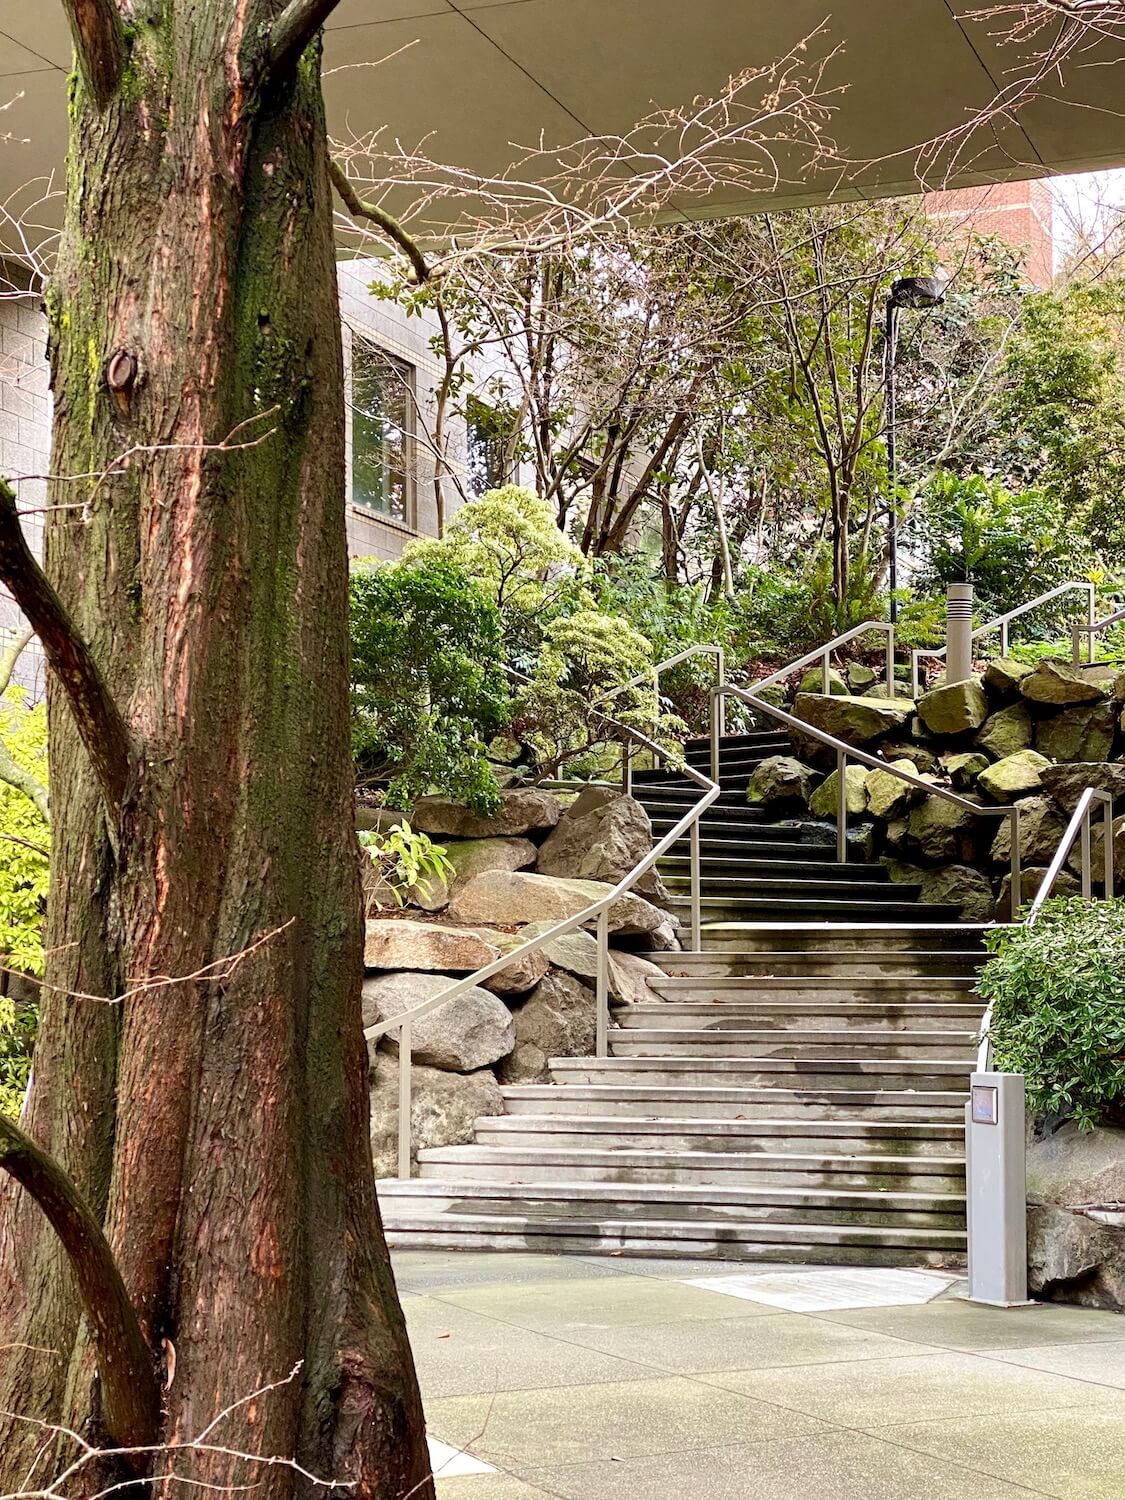 A stairway leads up a bank composed of propped up boulders framed in by the trunk of a cedar tree.  